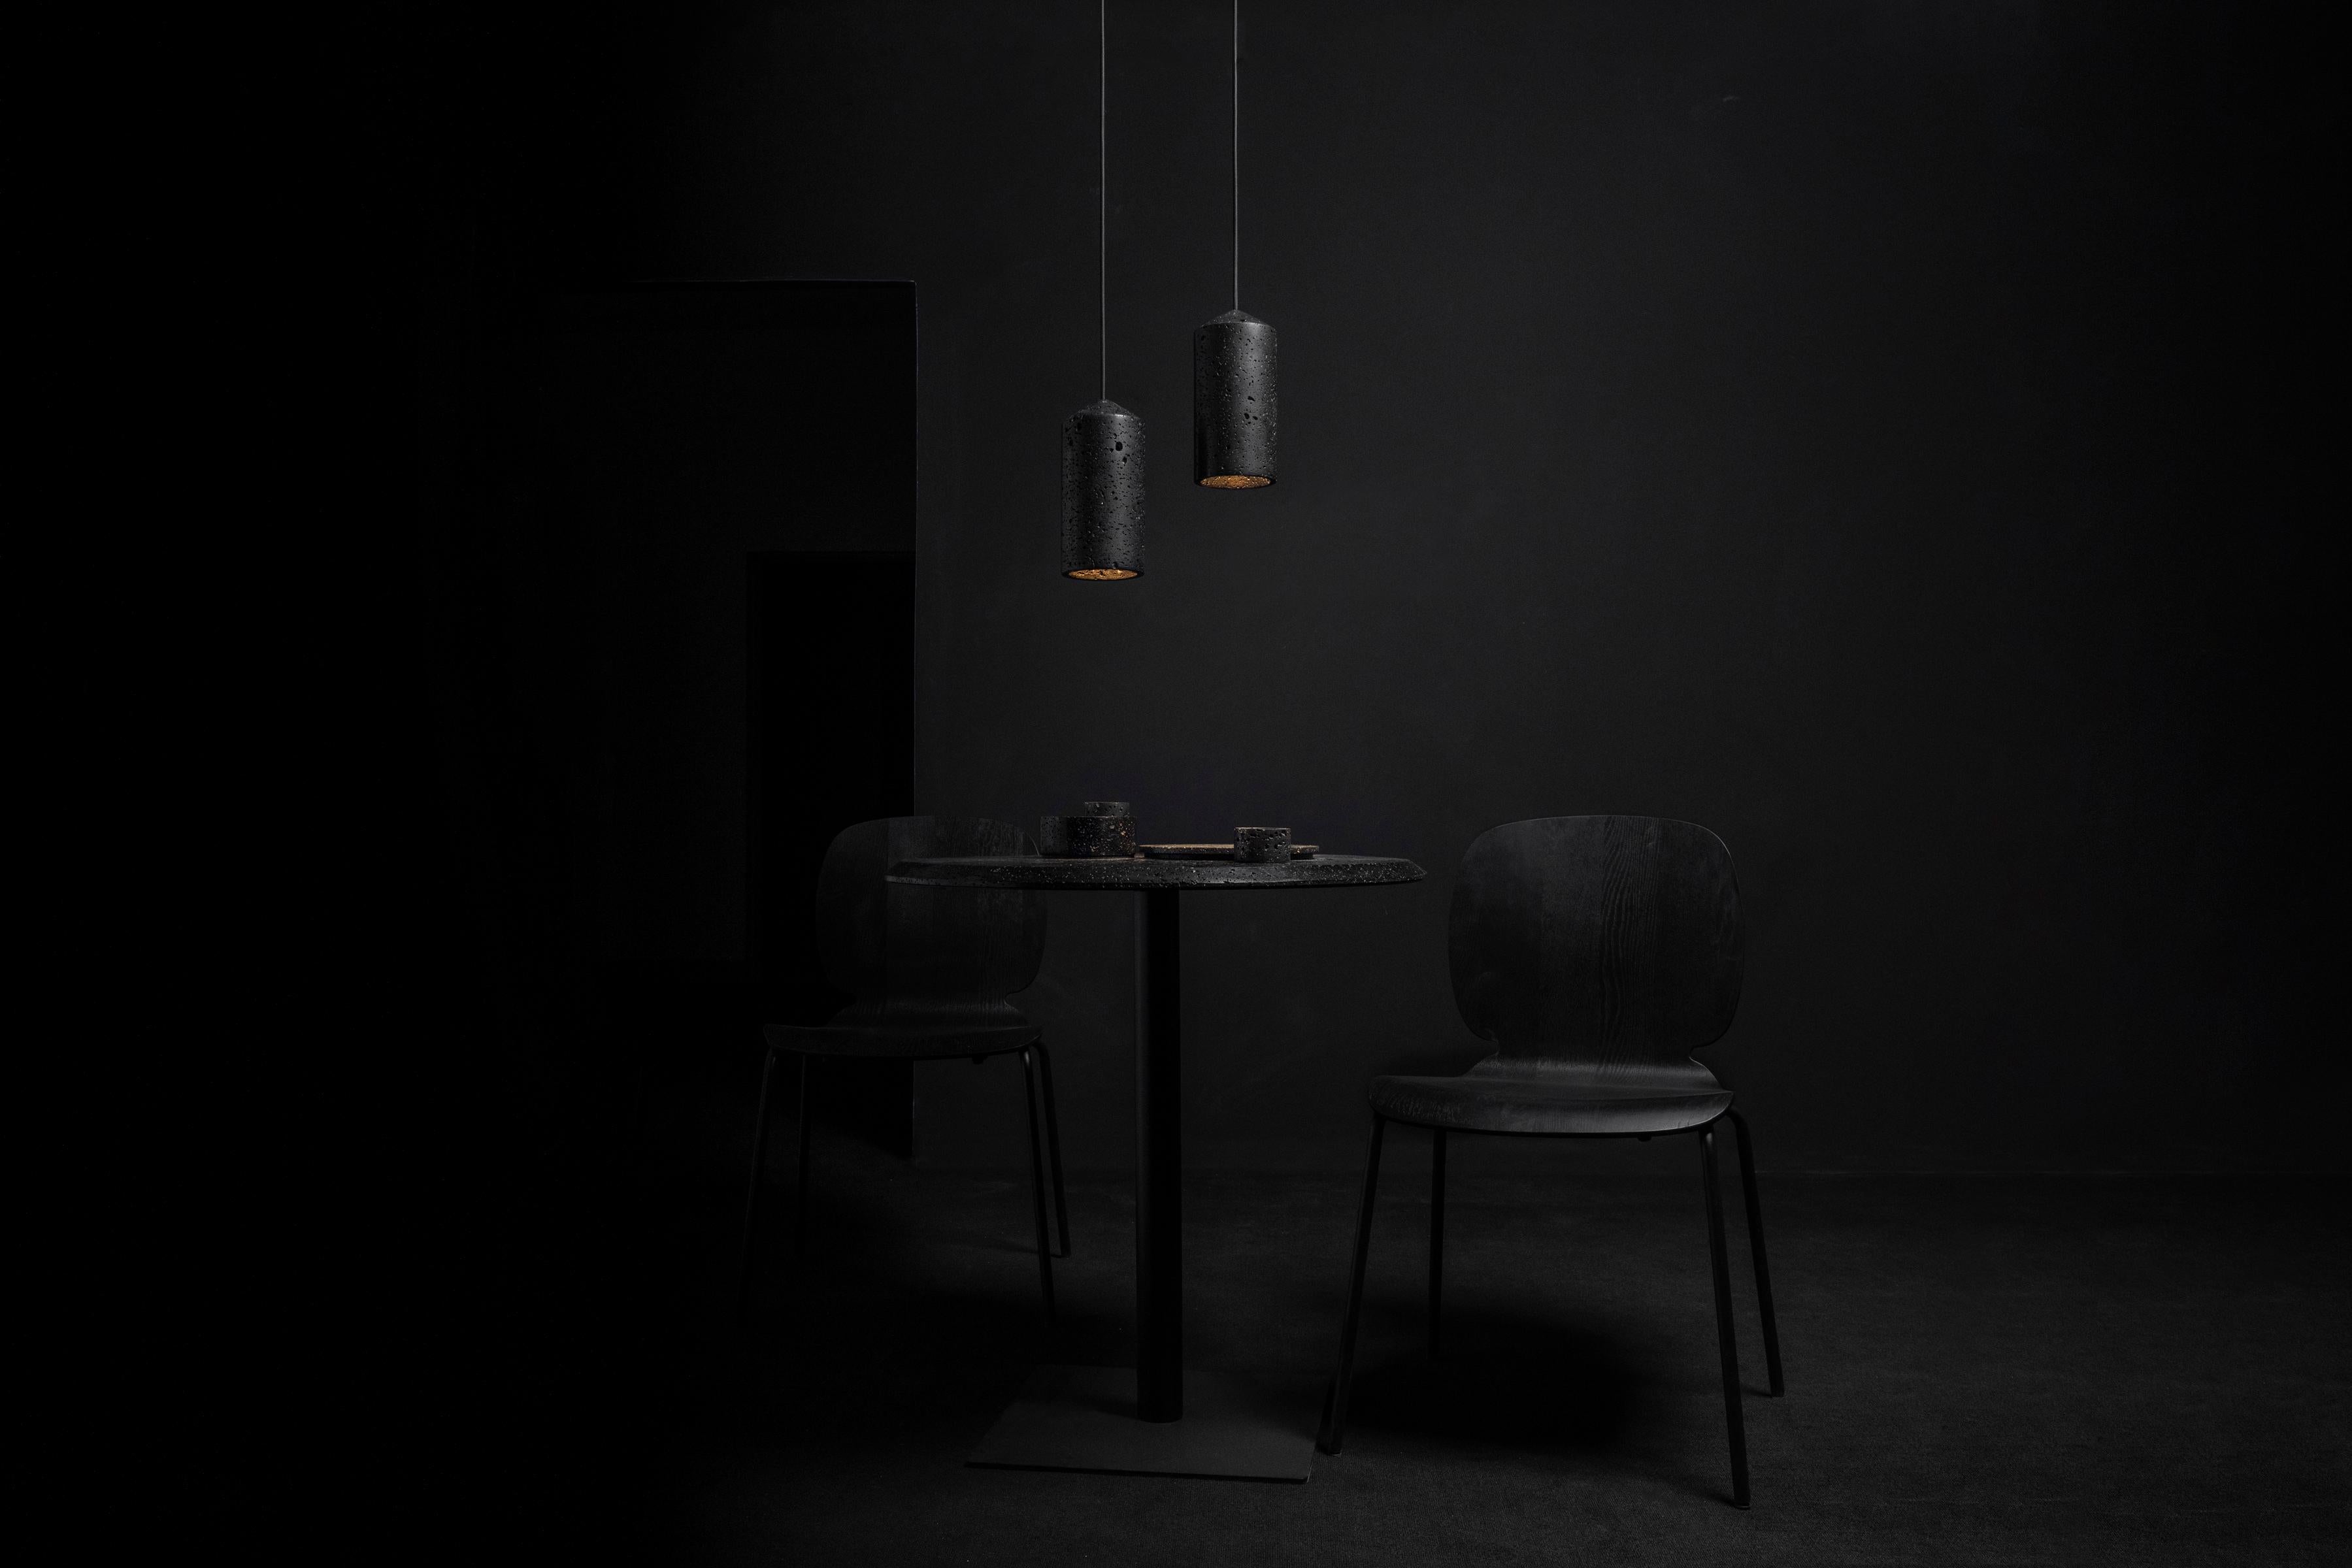 Chinese Lava Stone and Aluminum Pendant Light, “In, ” by Buzao